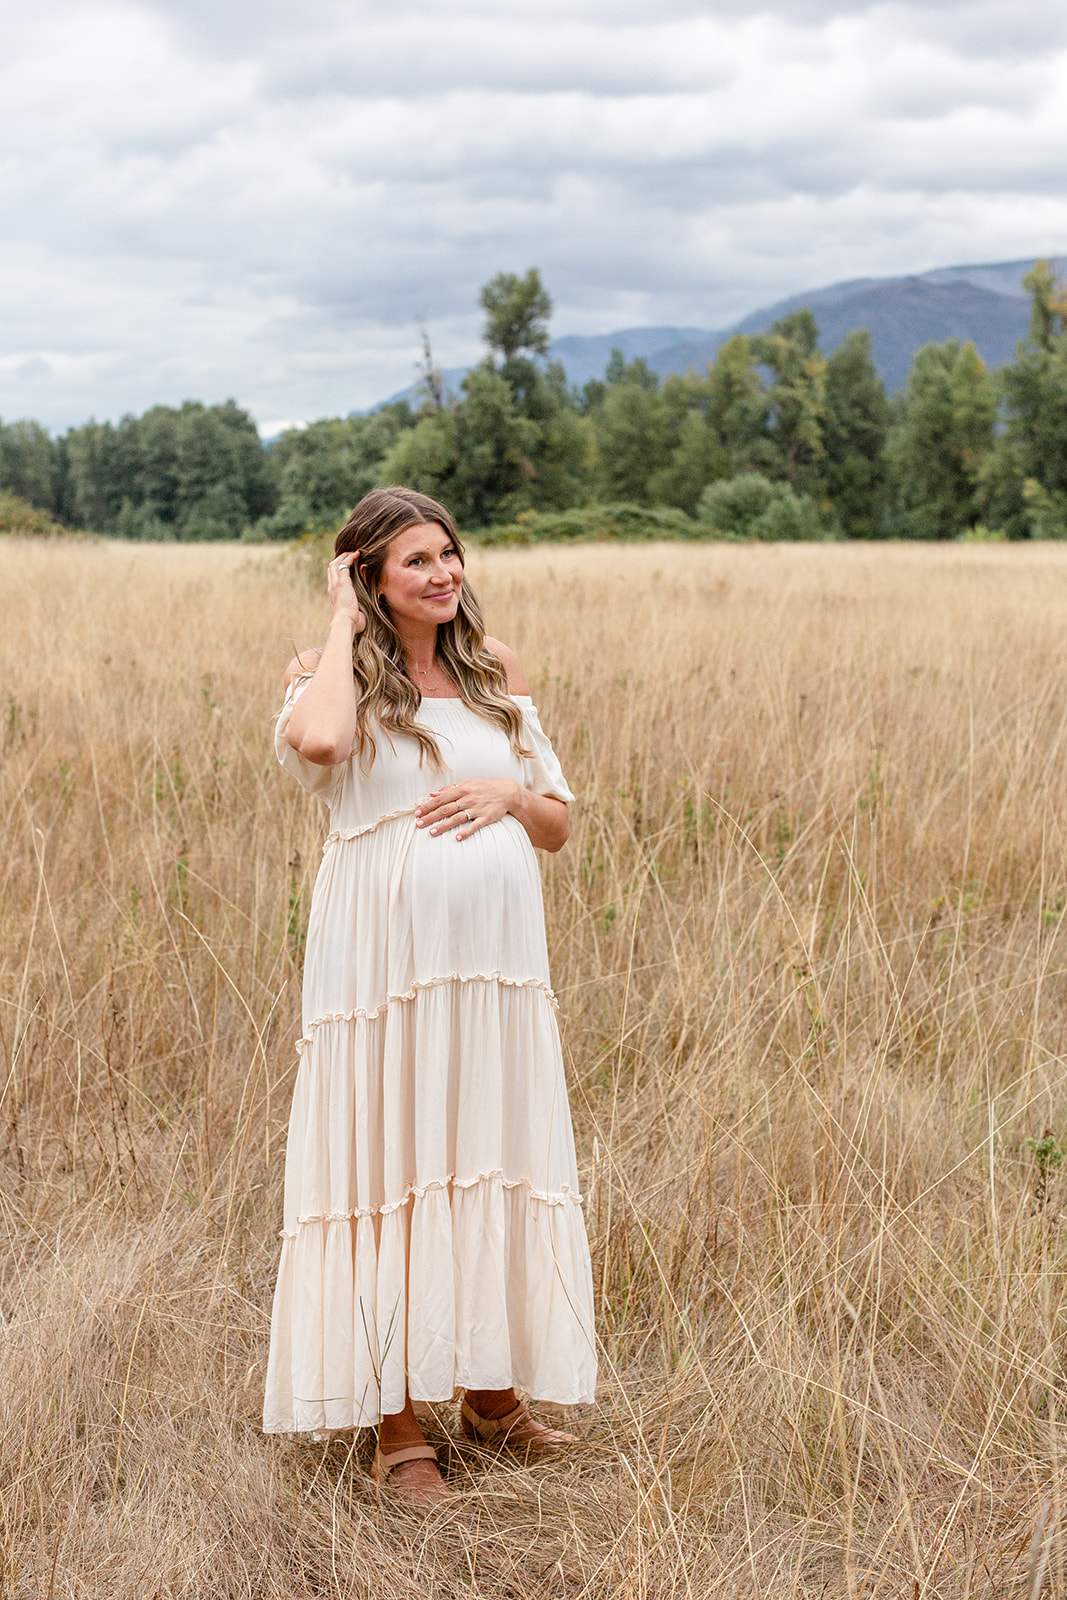 A mother to be in a white maternity gown stands in a field of tall golden grass pulling her hair back